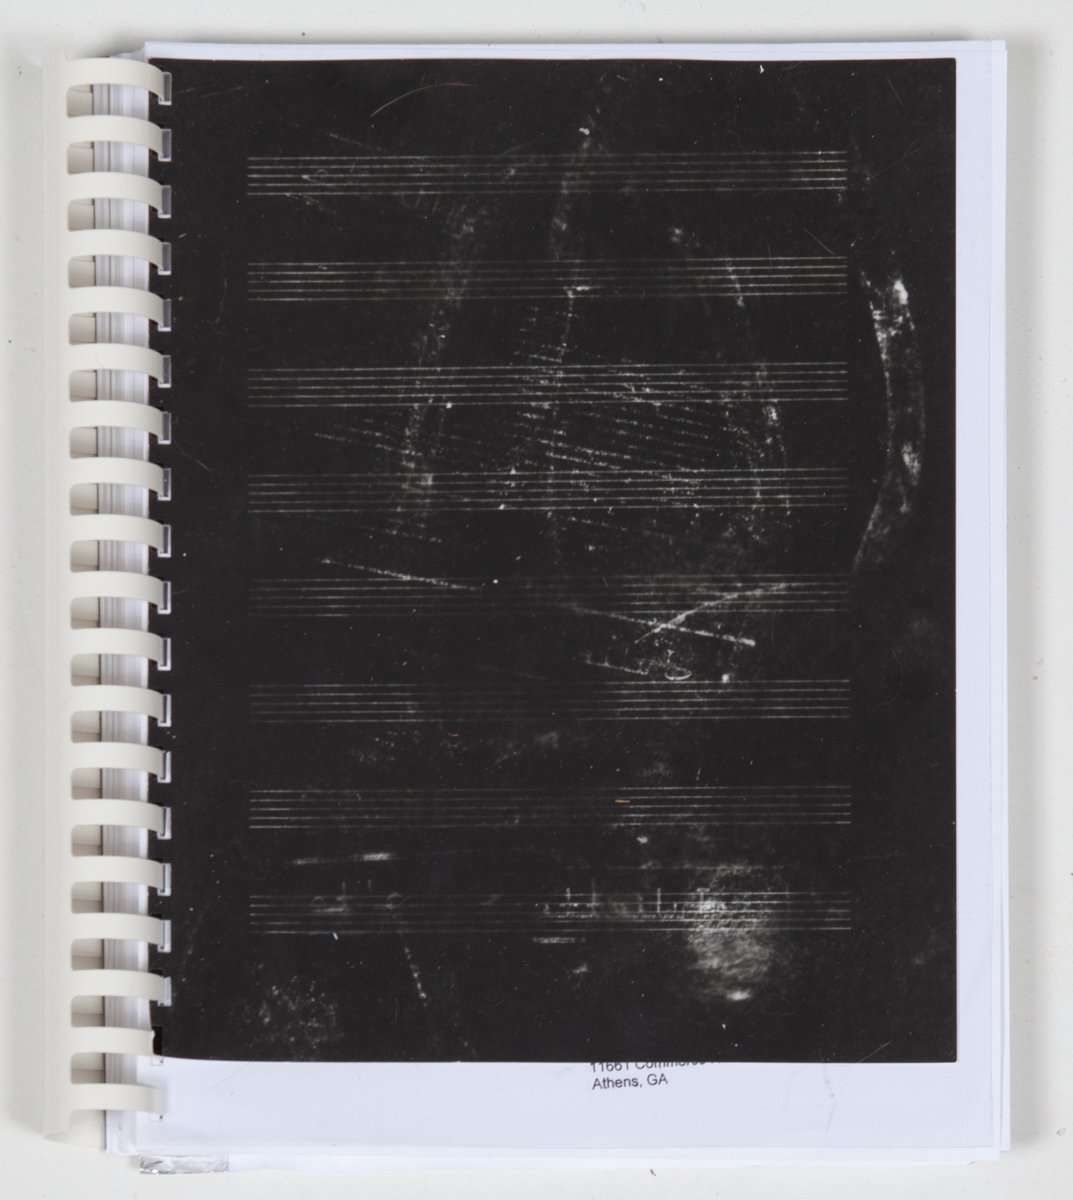  Cover: Gelatin Silver Contact Print prepared from paper "negative" (xerox copy of ink rubbing on sheet music). Reader: Xerox Text (The Life and Death of the Great American City); Xerox Images; Toner; Ink; Comb-binding; Foil Tape; Self-Inking Stamp (